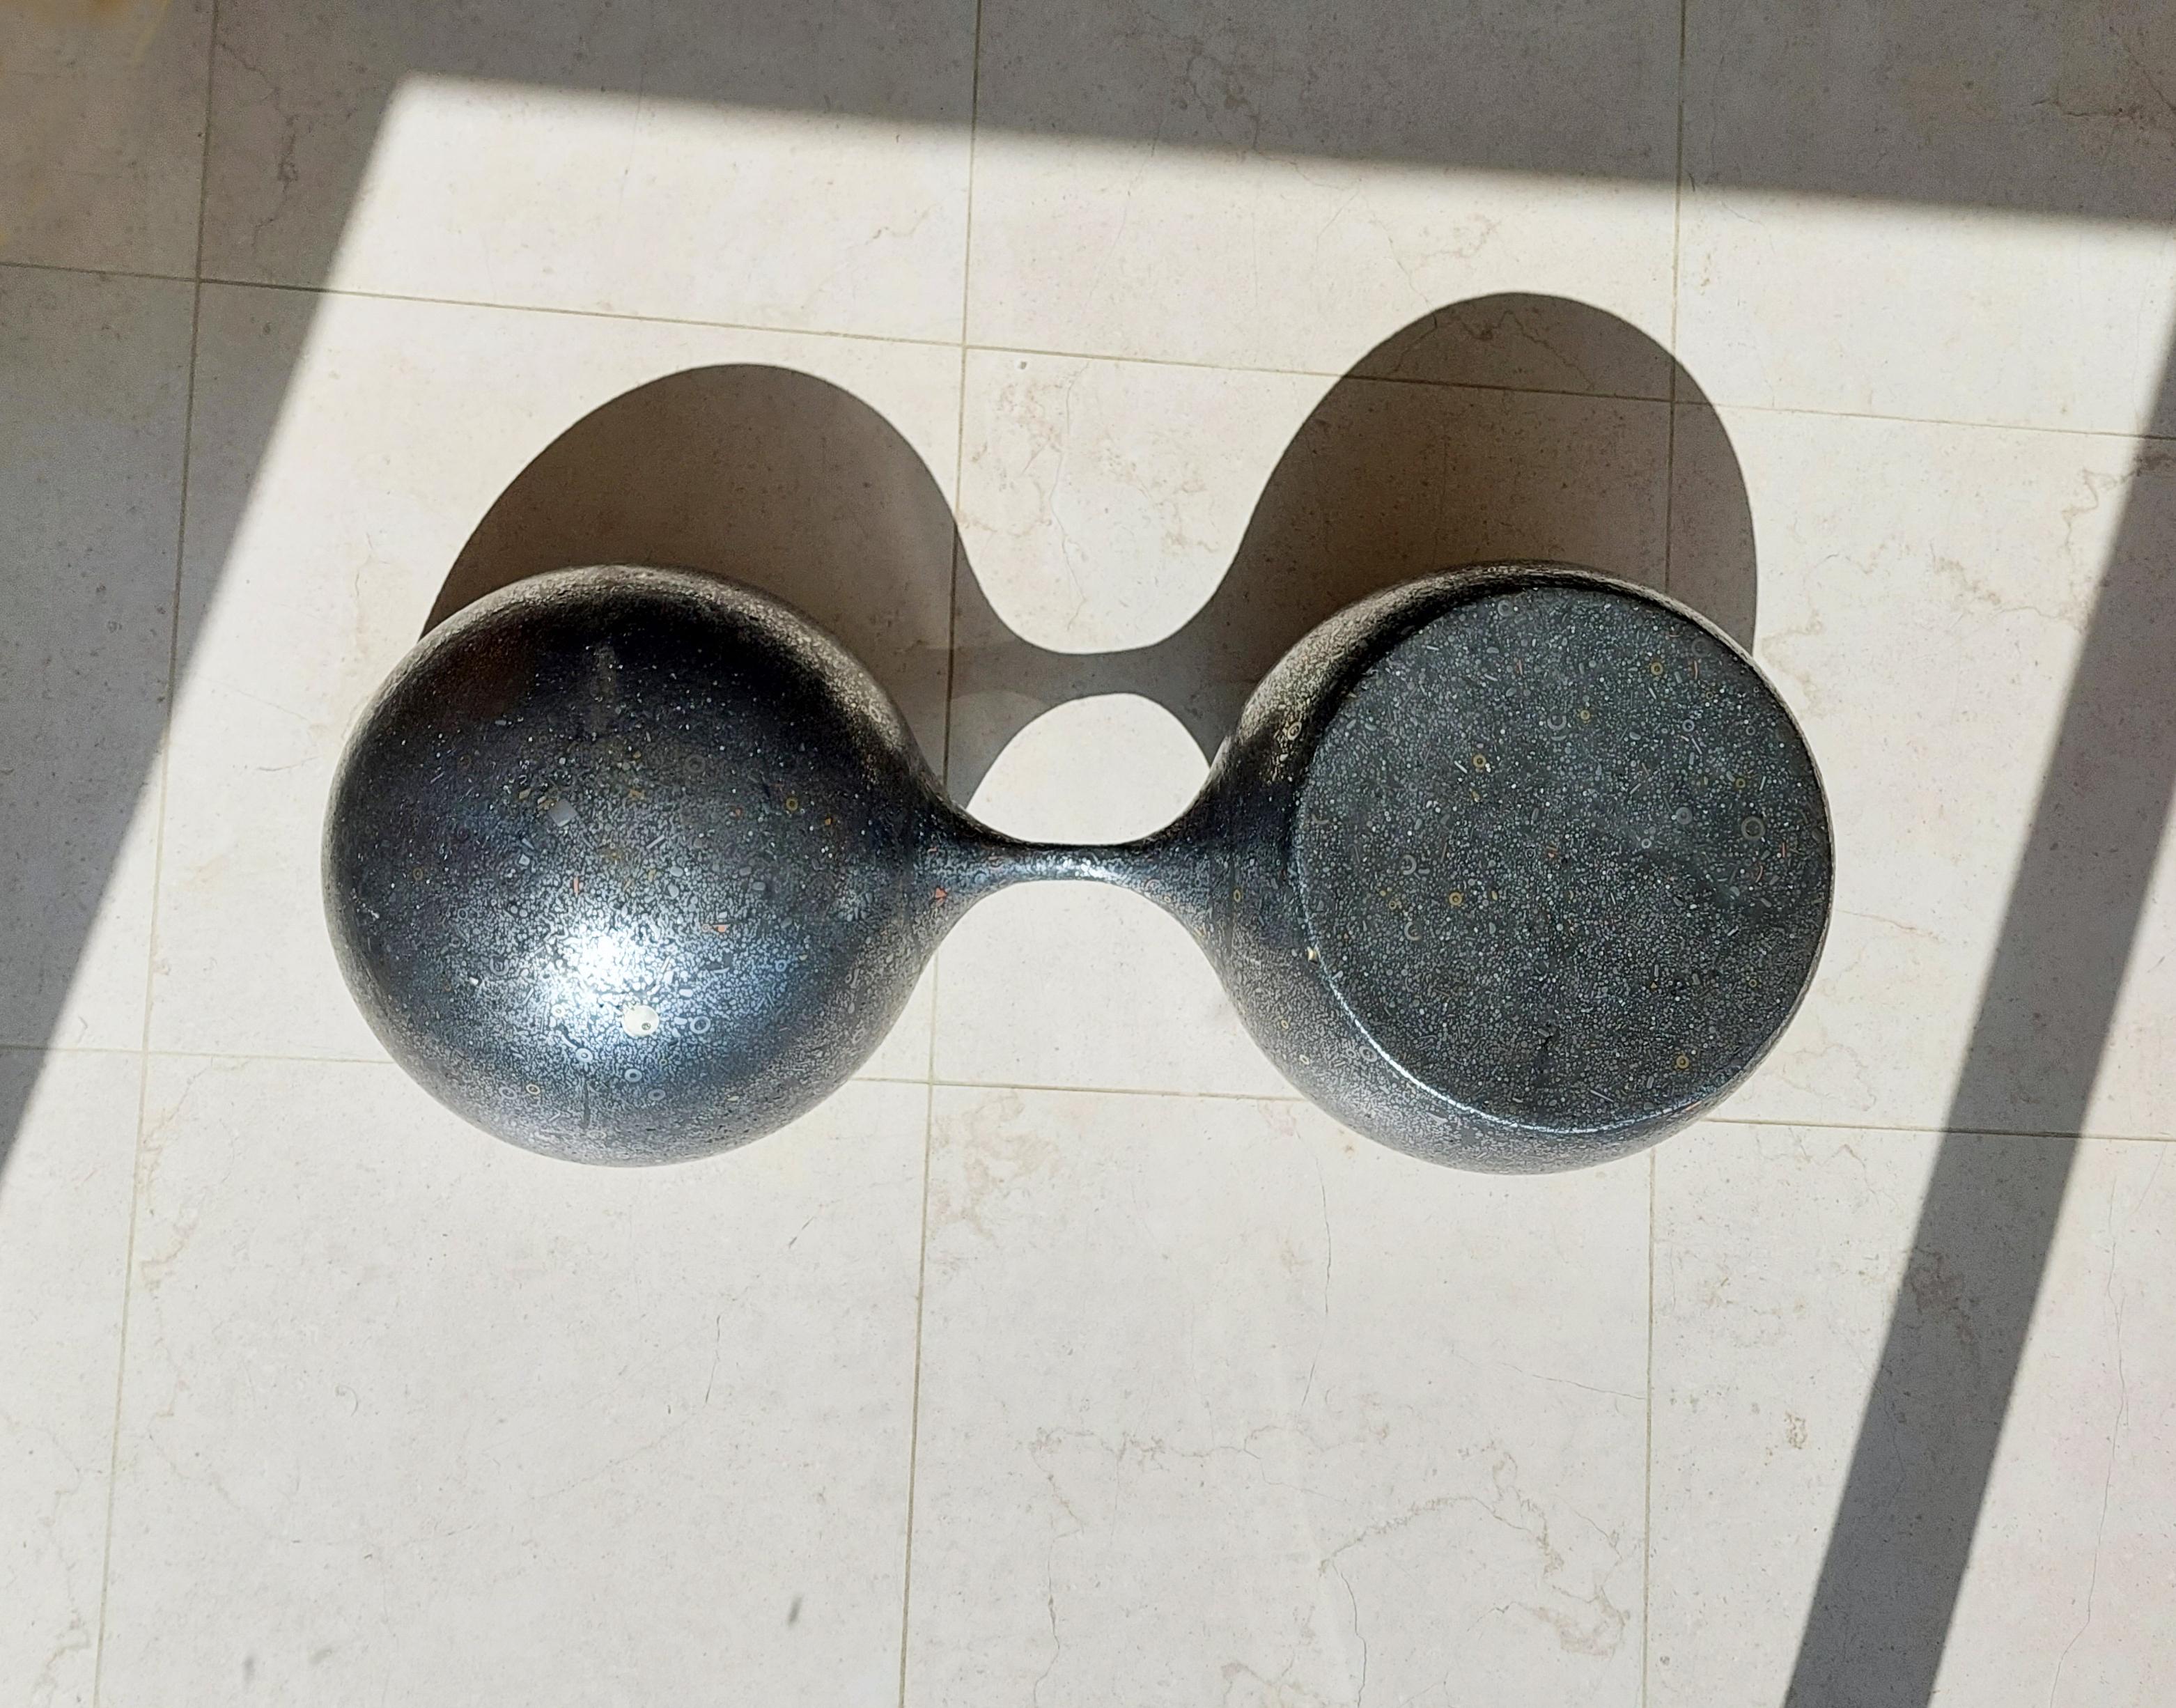 Cast “Dumbell” Sculptural Coffee Table / Sculpture / Object For Sale